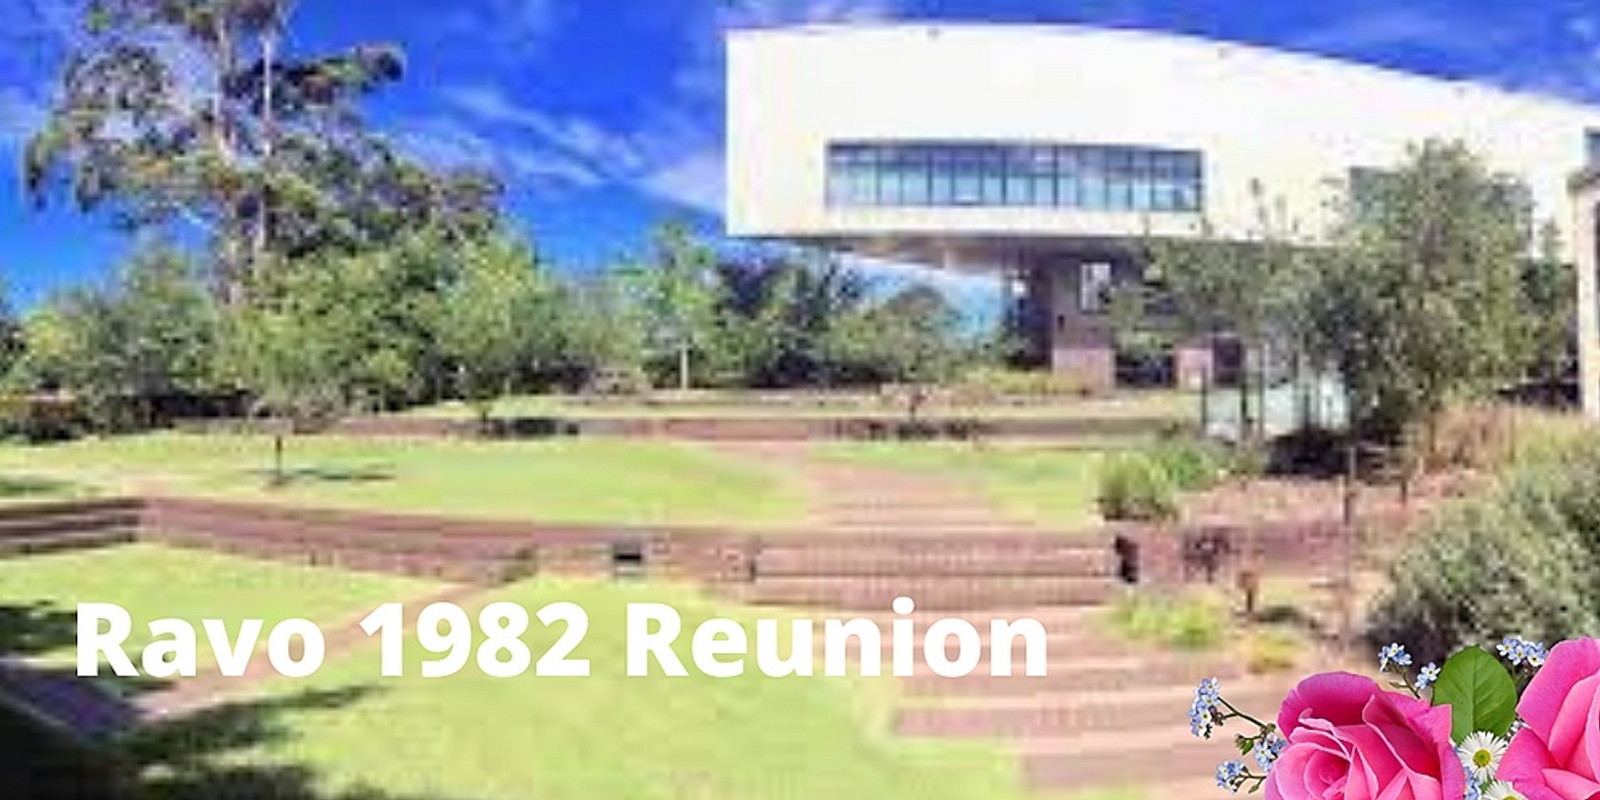 Banner image for Ravo 40th Reunion 1982 